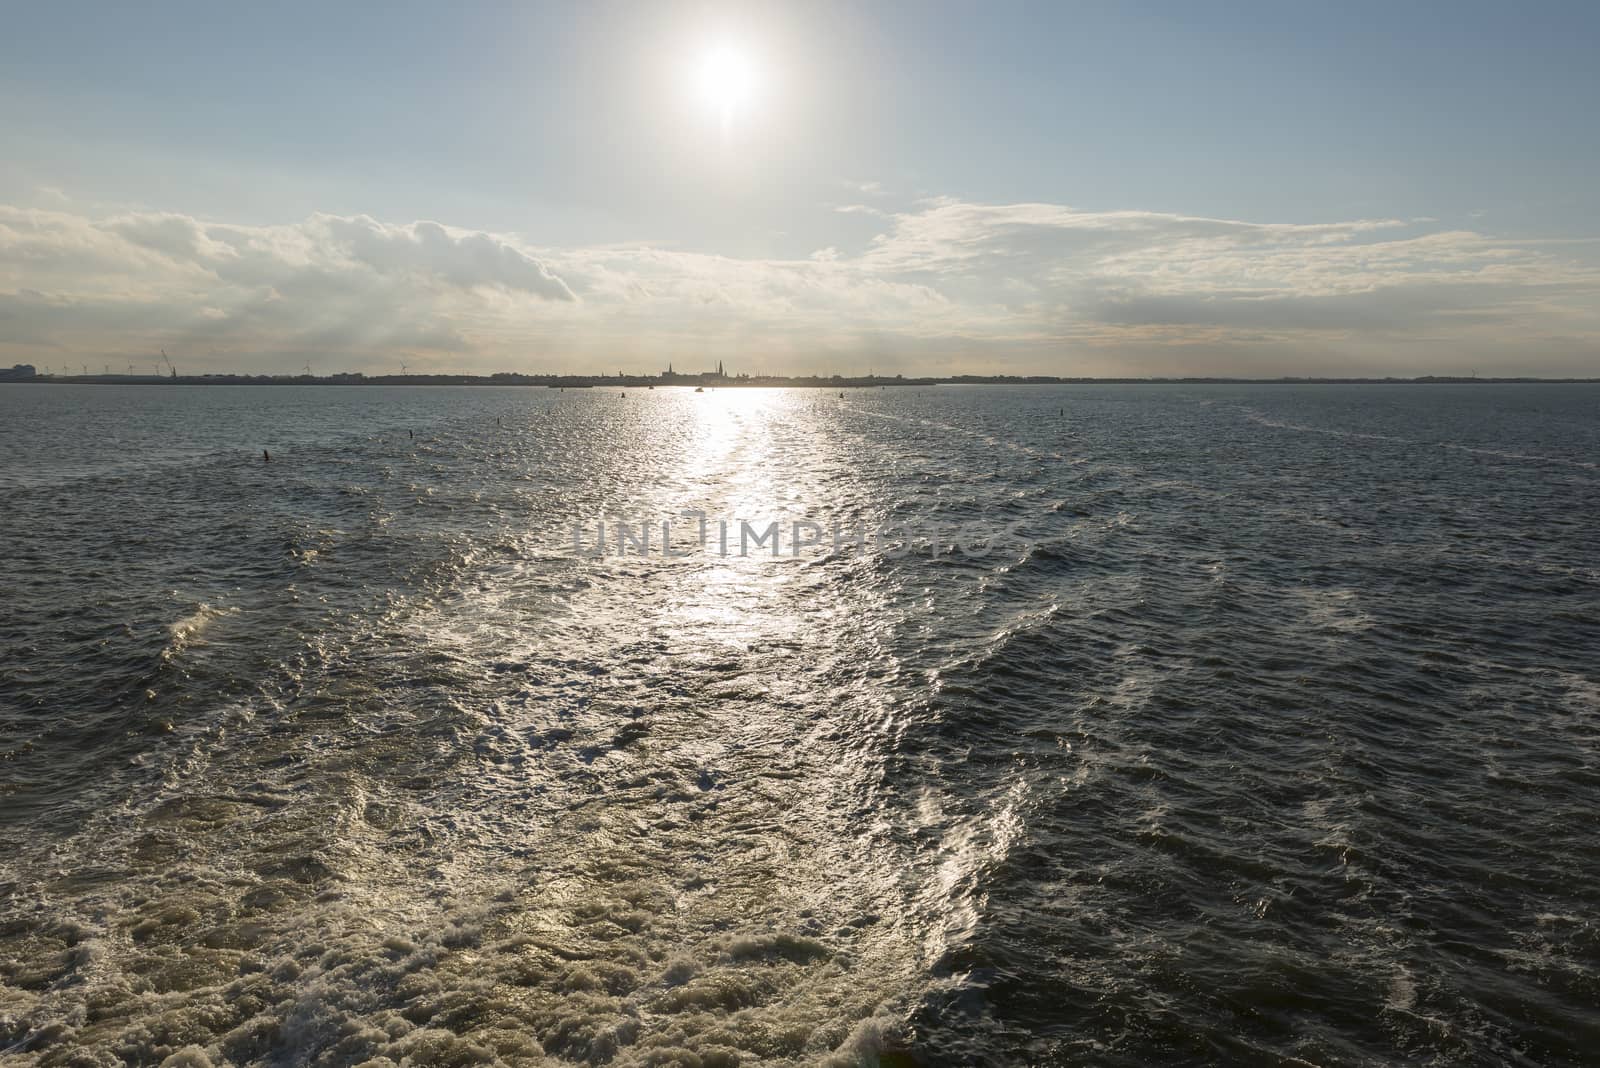 Wake behind the ferry from Harlingen to Vlieland in the Netherla by Tofotografie